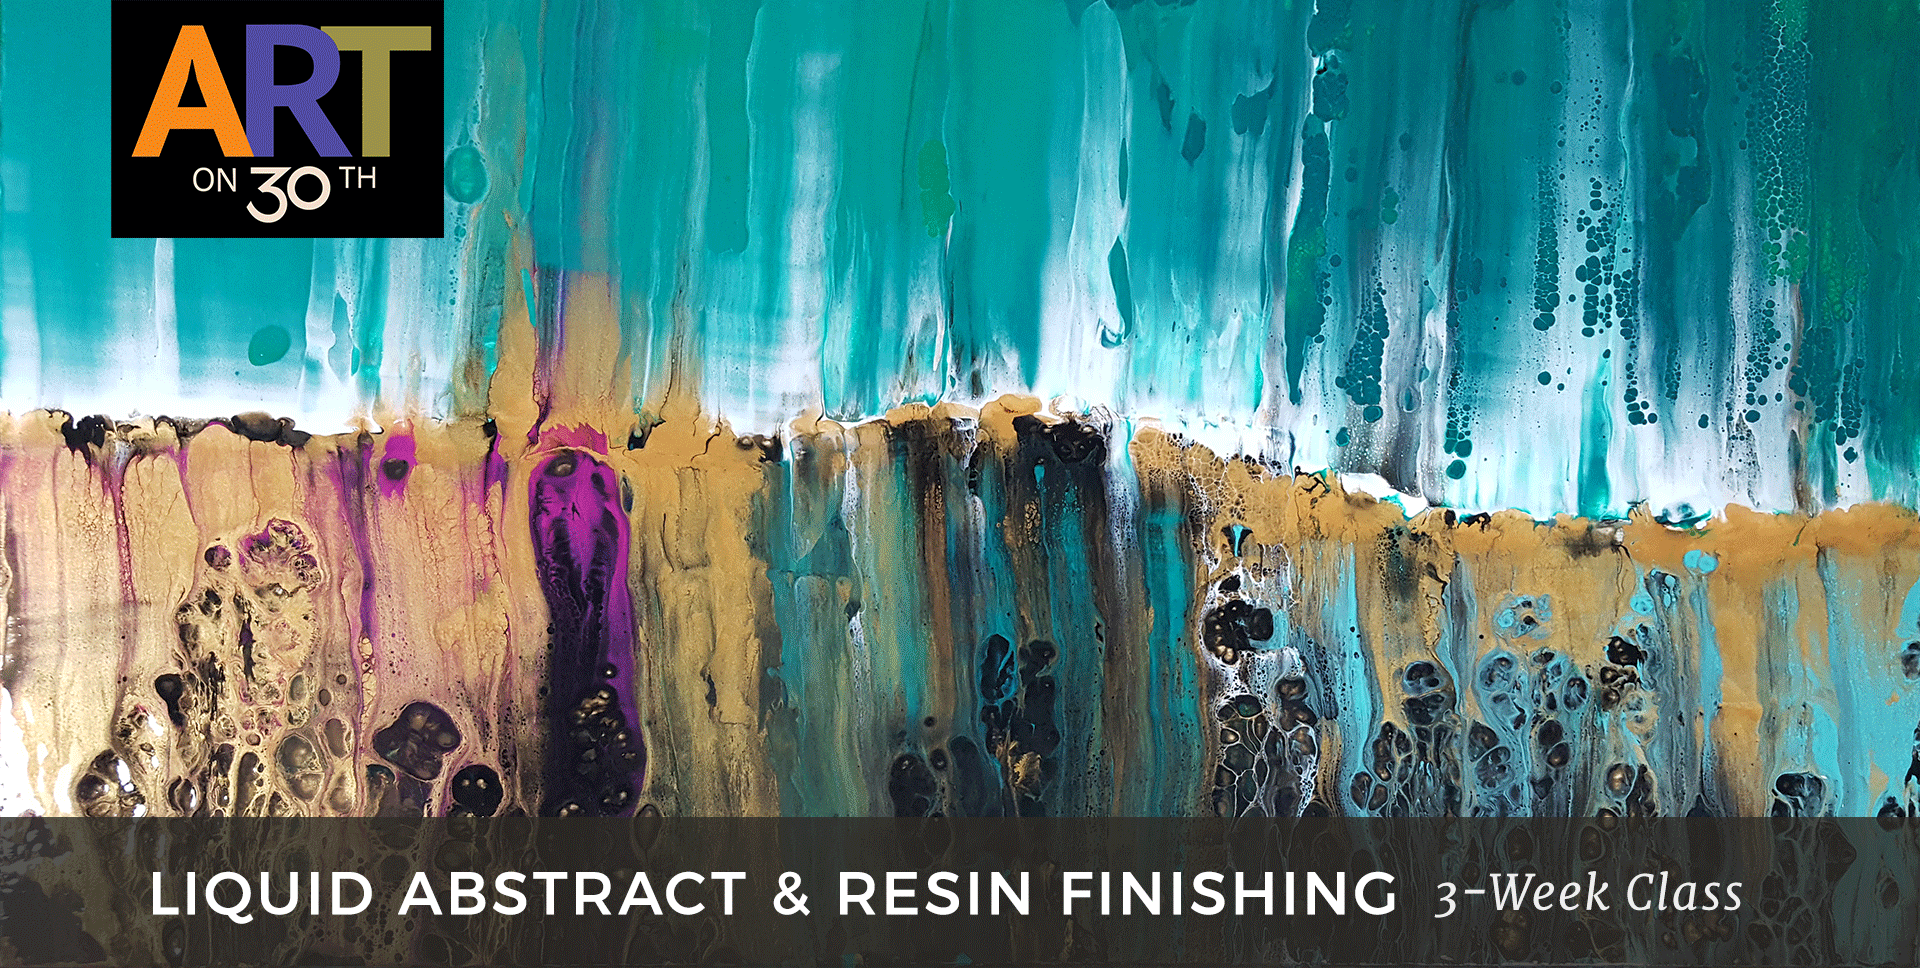 WED - Liquid Abstract & Resin Finishing with instructor Brandon Jameson